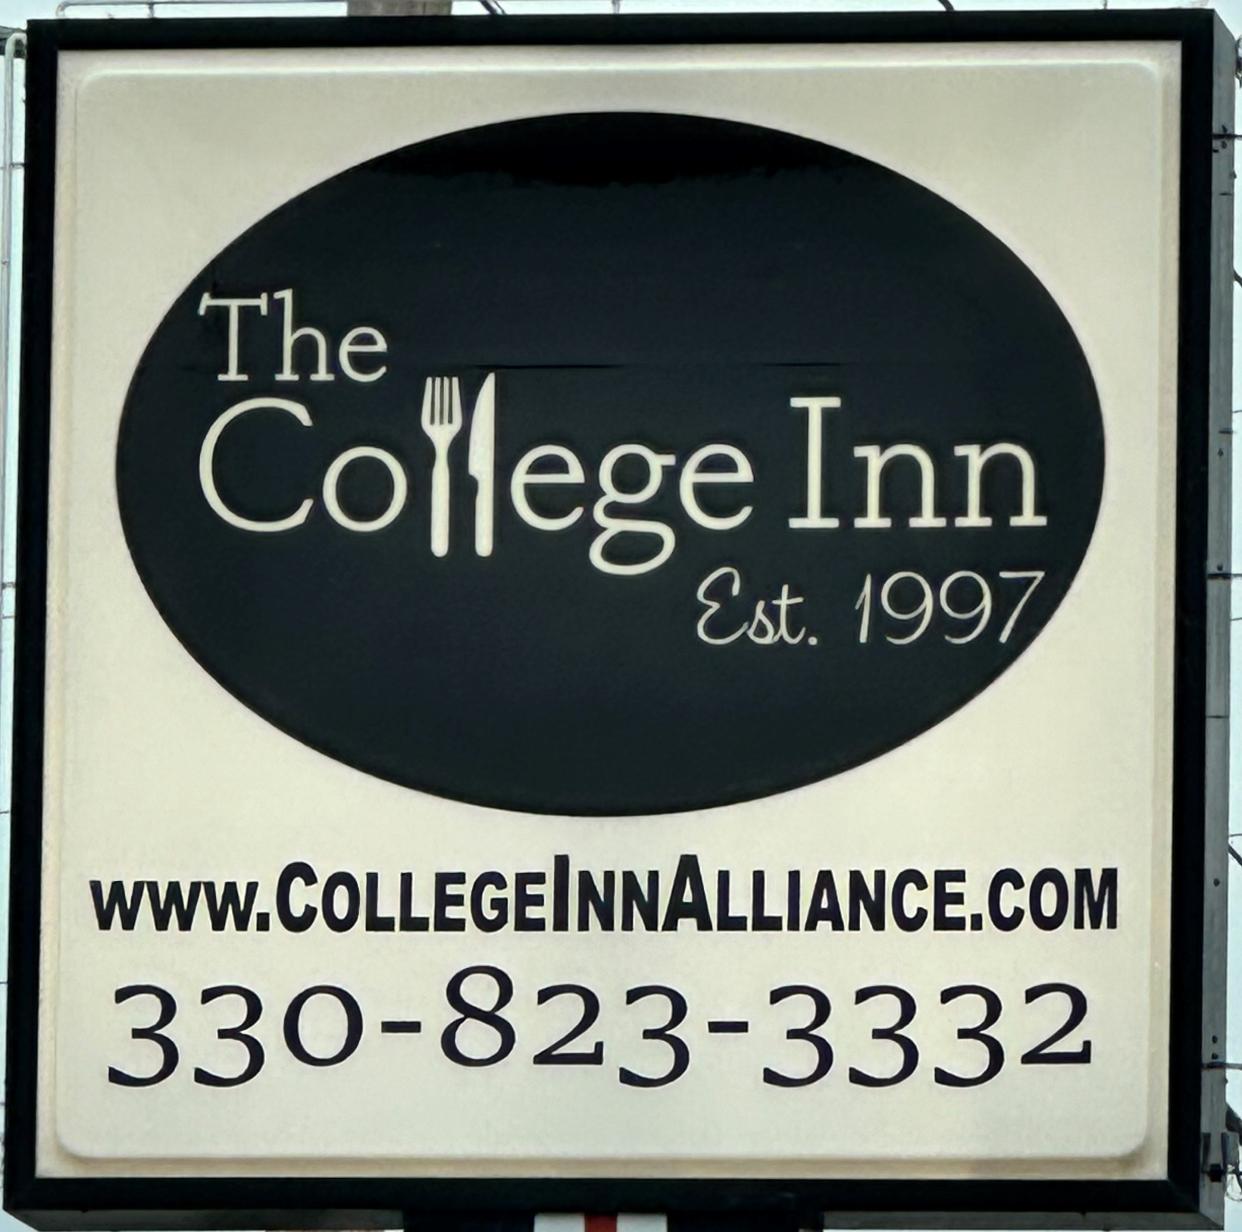 The sign at 935 W. State St. in Alliance welcomes you to The College Inn.